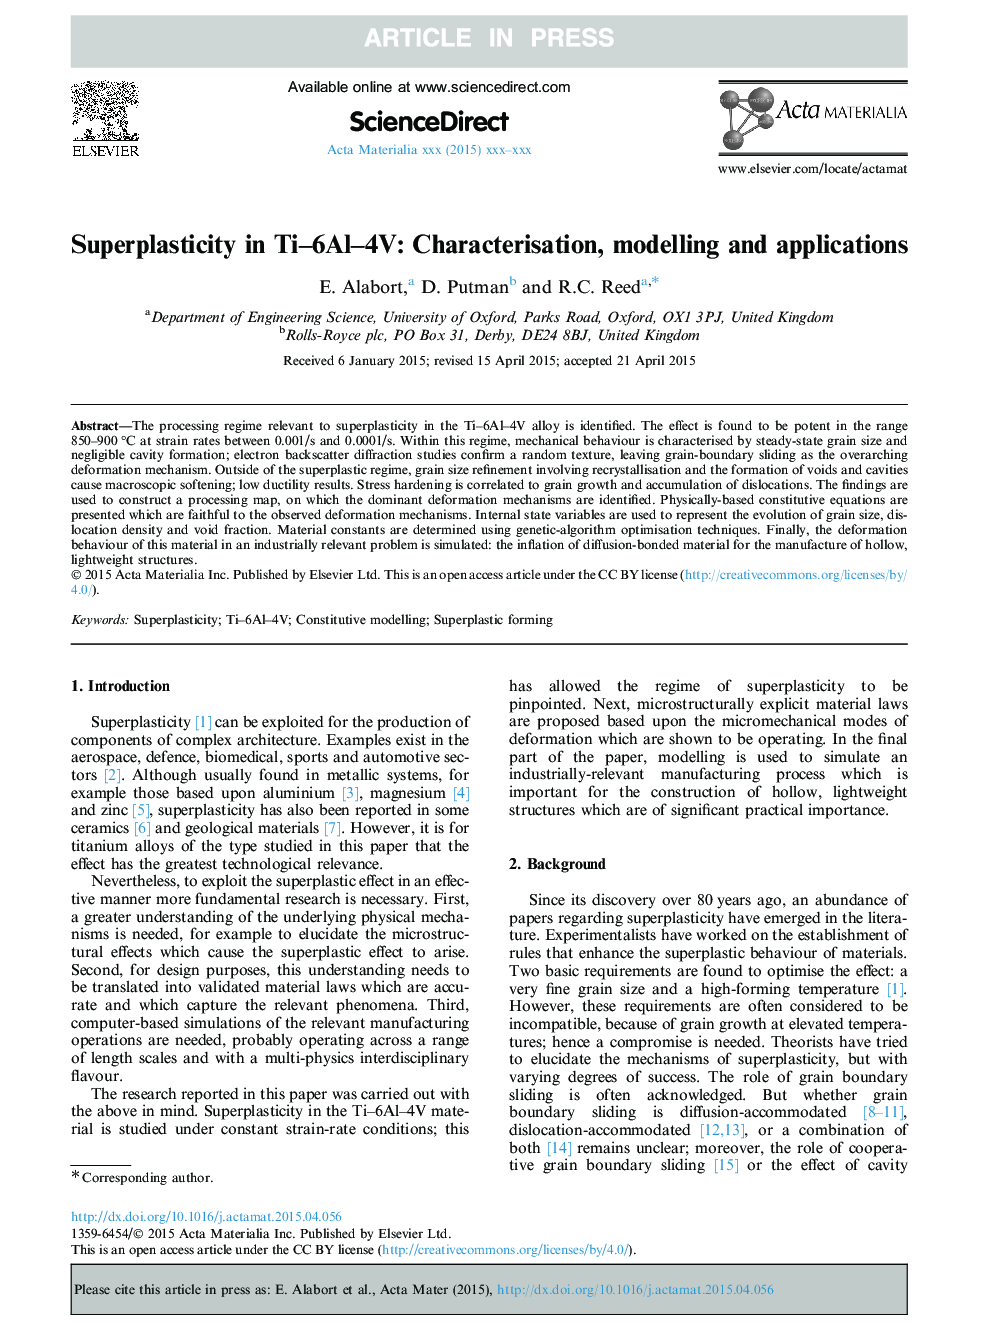 Superplasticity in Ti-6Al-4V: Characterisation, modelling and applications